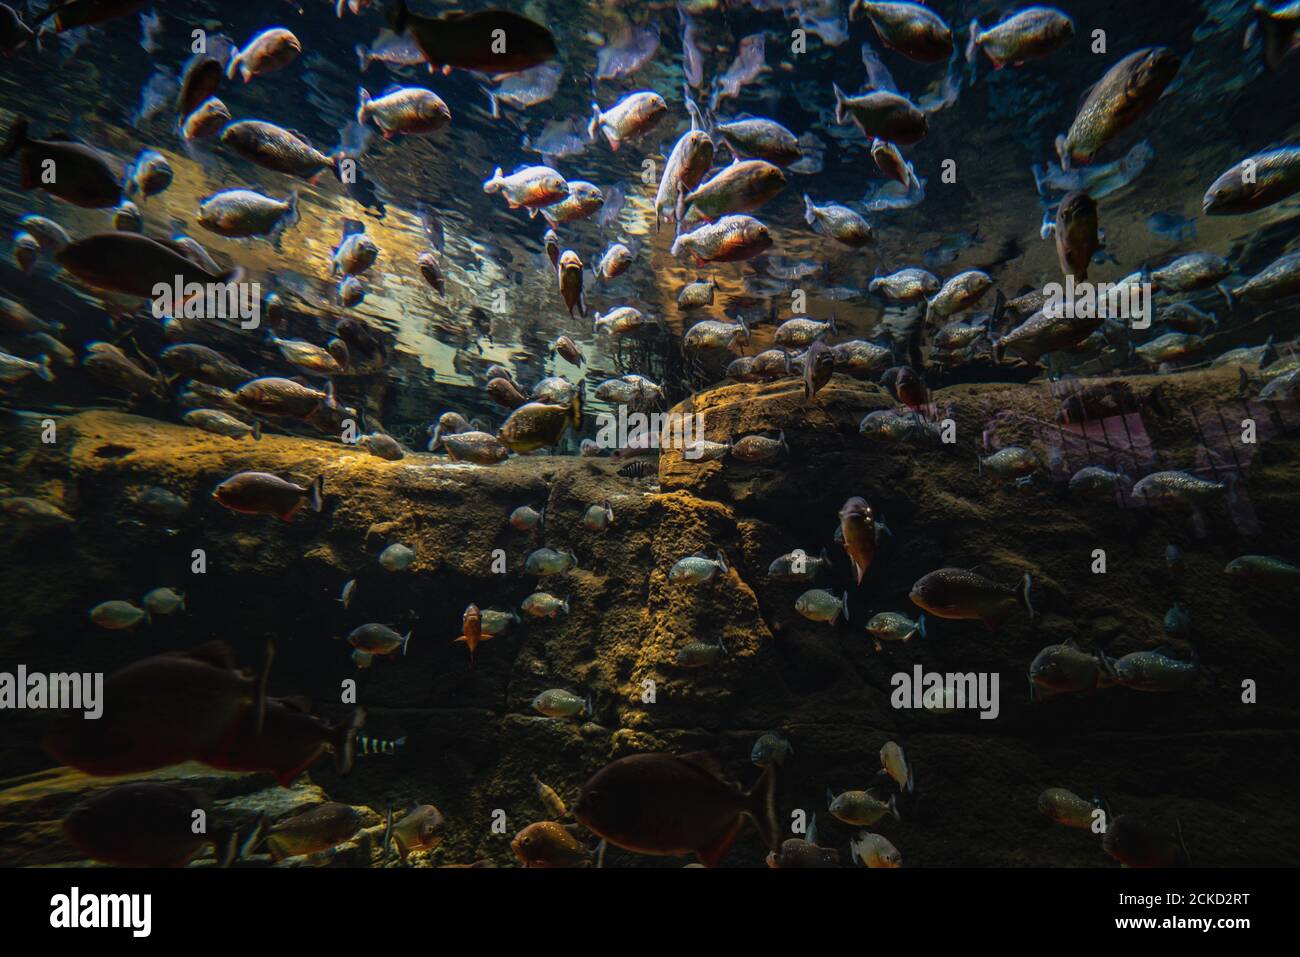 Fish flock gathered in an underwater scene. Large group or bunch of fishes packed together under water raises concern for ecosystem sustainability Stock Photo